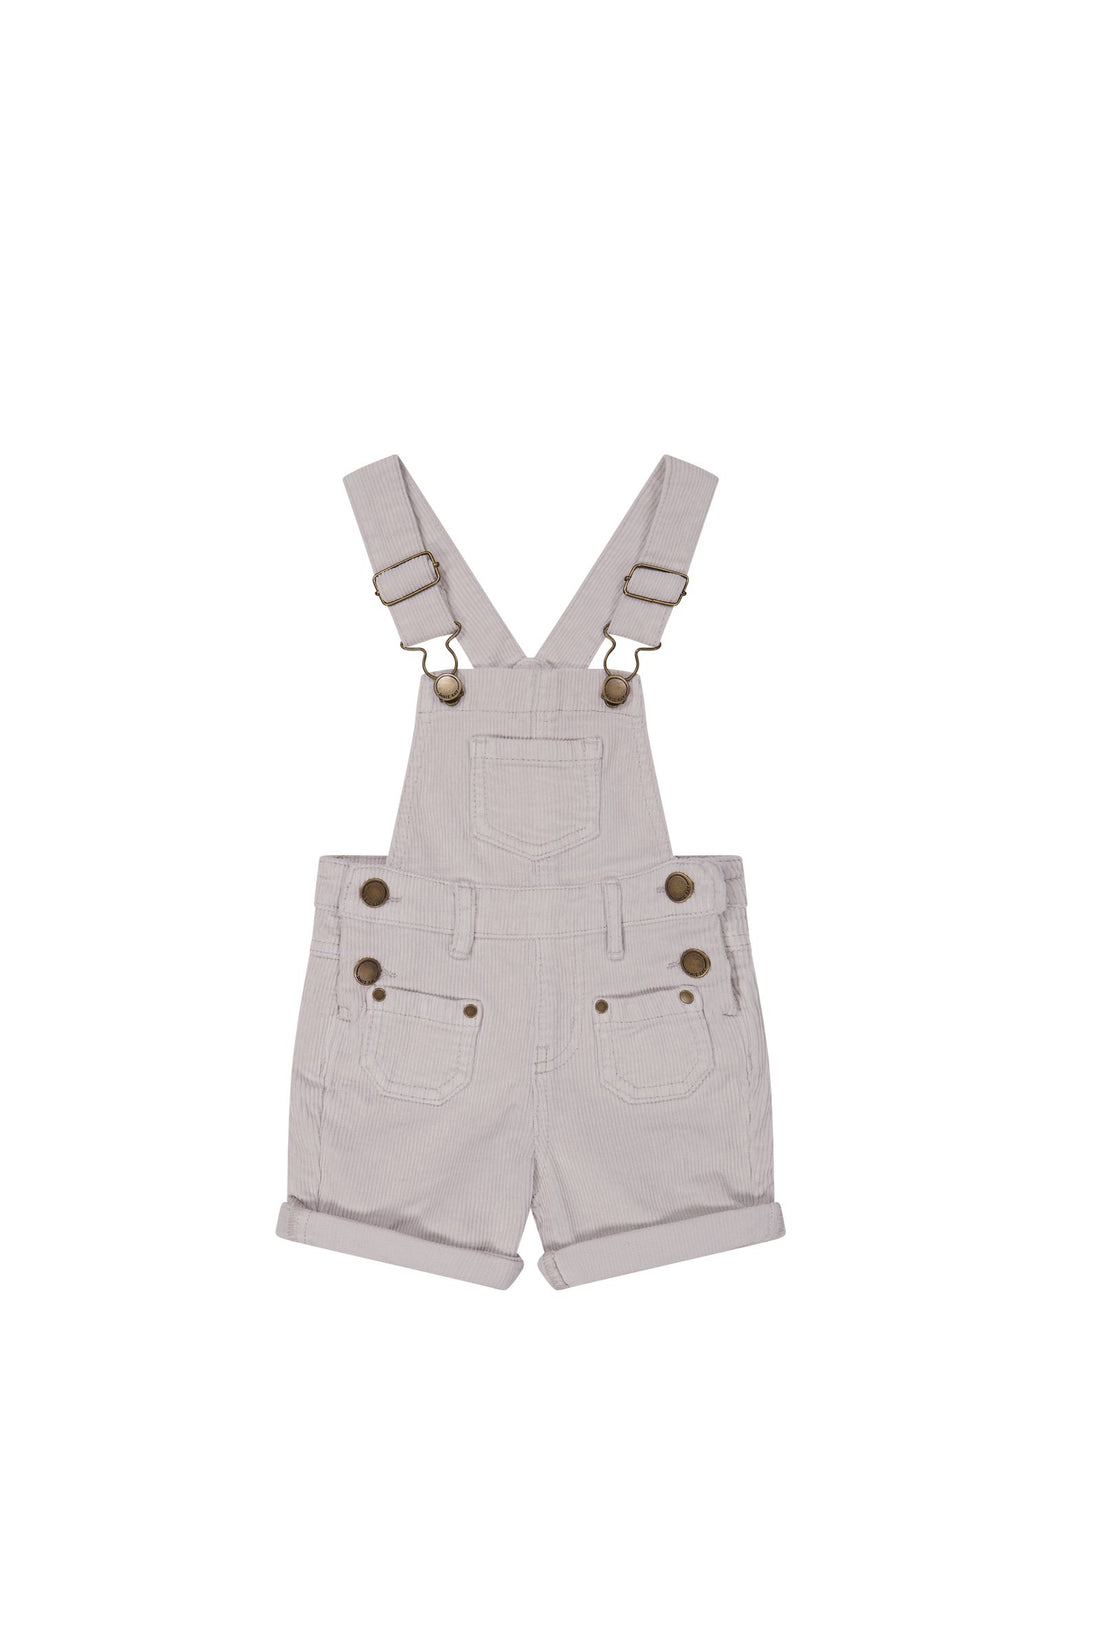 Chase Cord Short Overall - Luna Childrens Overall from Jamie Kay NZ